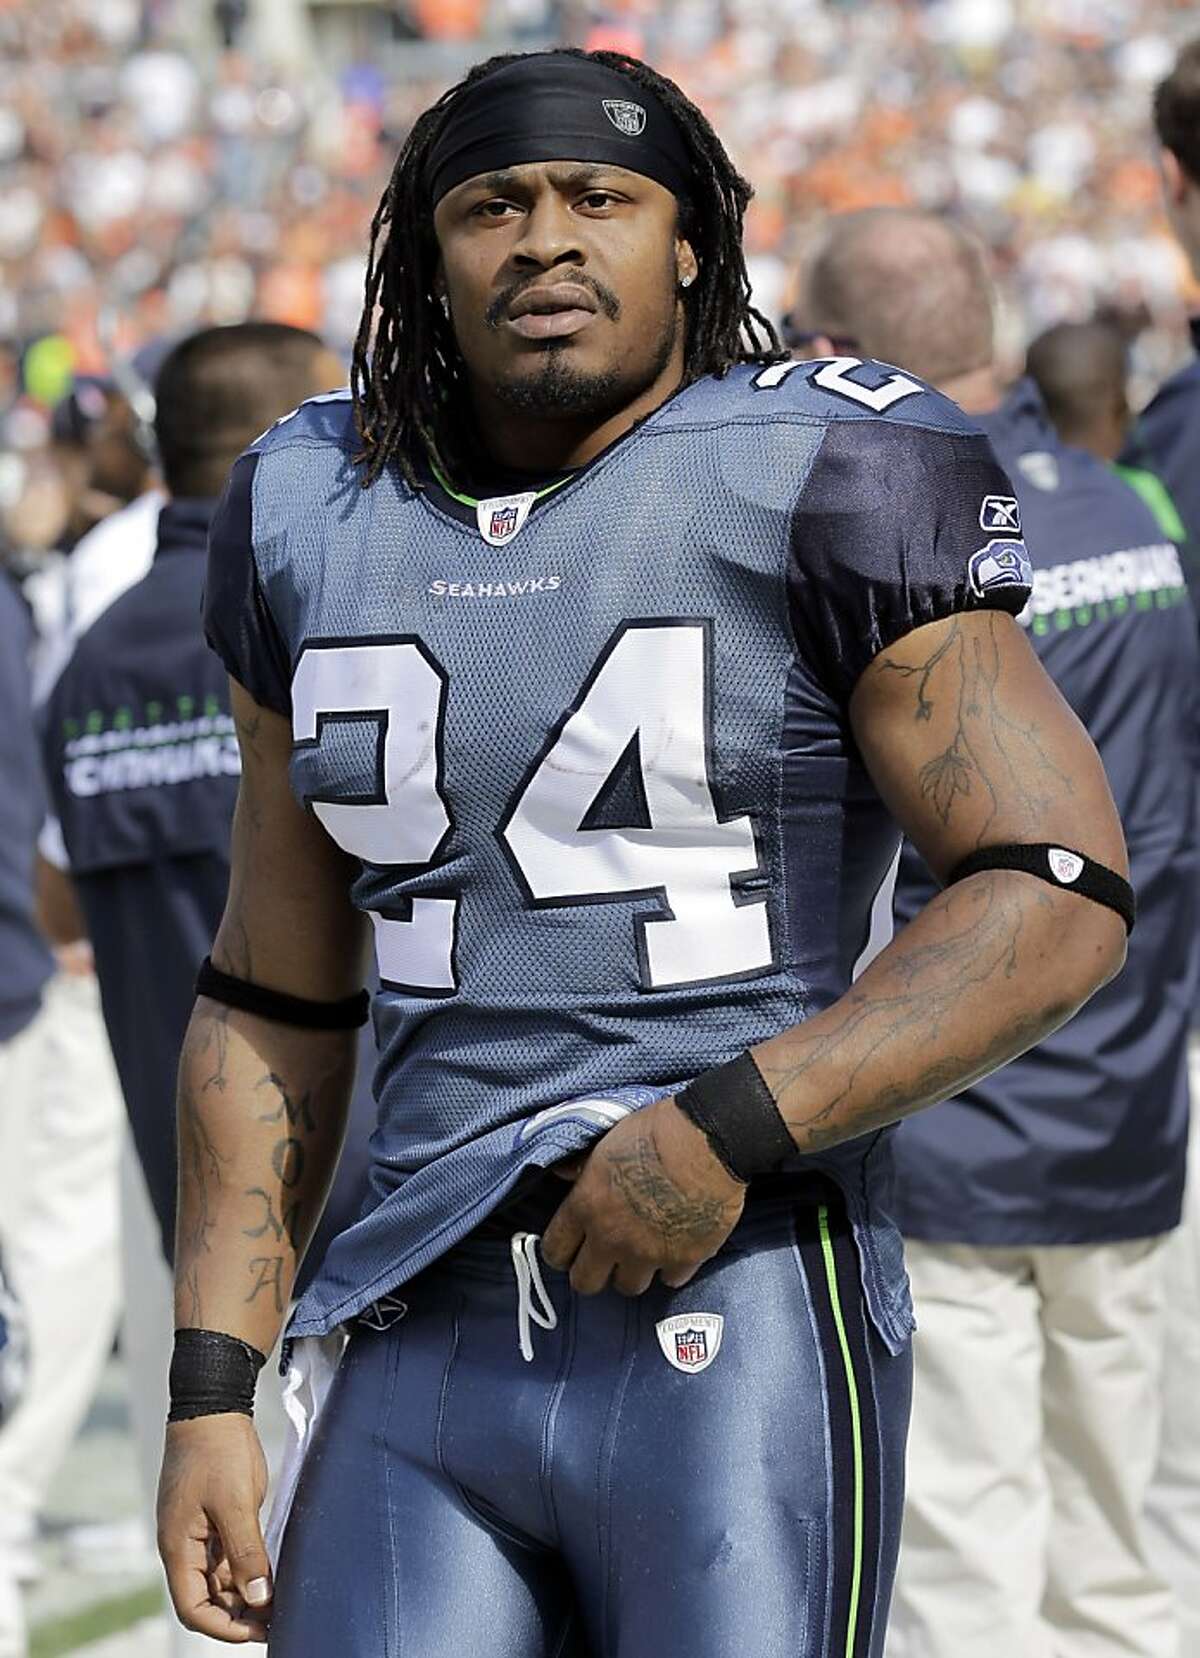 ADVANCE FOR WEEKEND EDITIONS, JULY 21-22 - FILE - FILE - In this Oct. 23, 2011 file photo, Seattle Seahawks running back Marshawn Lynch watches from the bench area during the second quarter of an NFL football game against the Cleveland Browns in Cleveland. Just one week before some camps open, three players critical to their teams' chances this season were arrested. Lynch, who served a three-game league suspension in 2009 for violating the personal conduct policy, was cited for DUI. (AP Photo/Amy Sancetta, File)